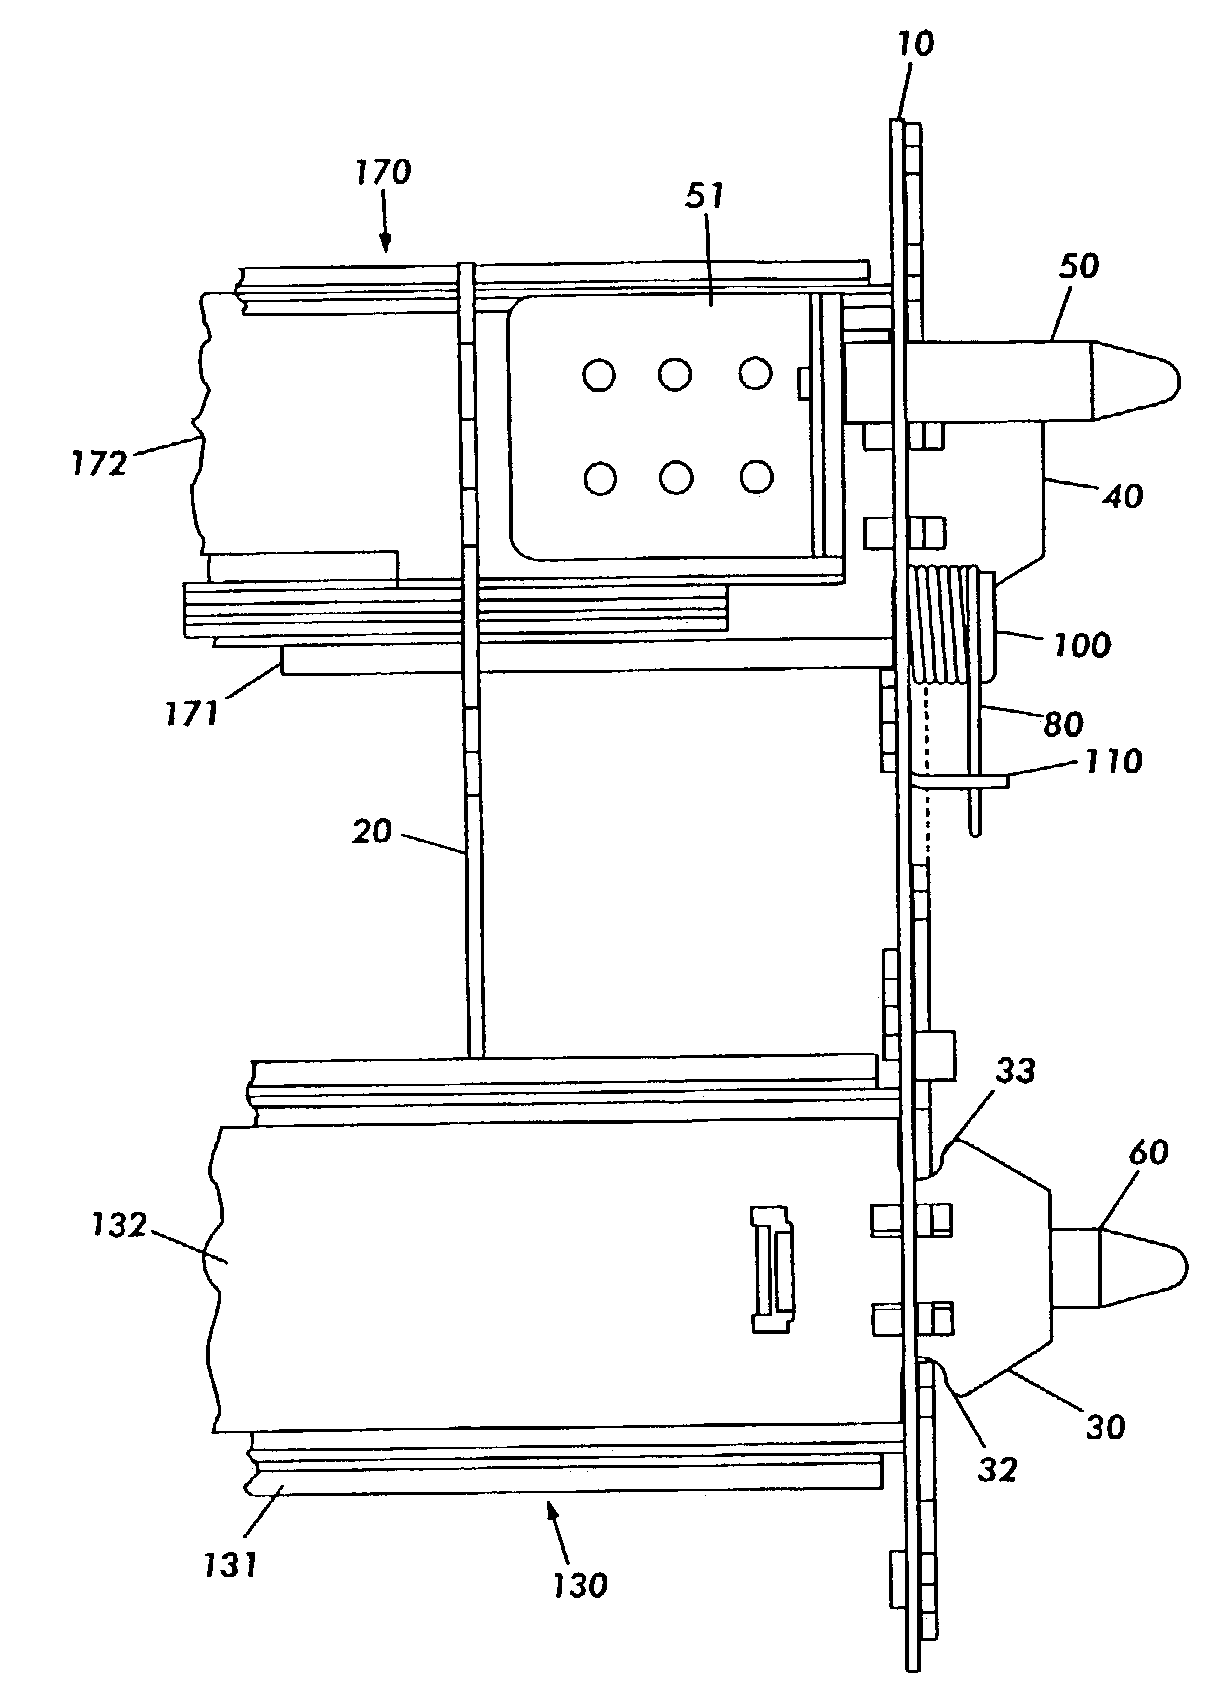 Apparatus and methods for connecting a movable subsystem to a frame